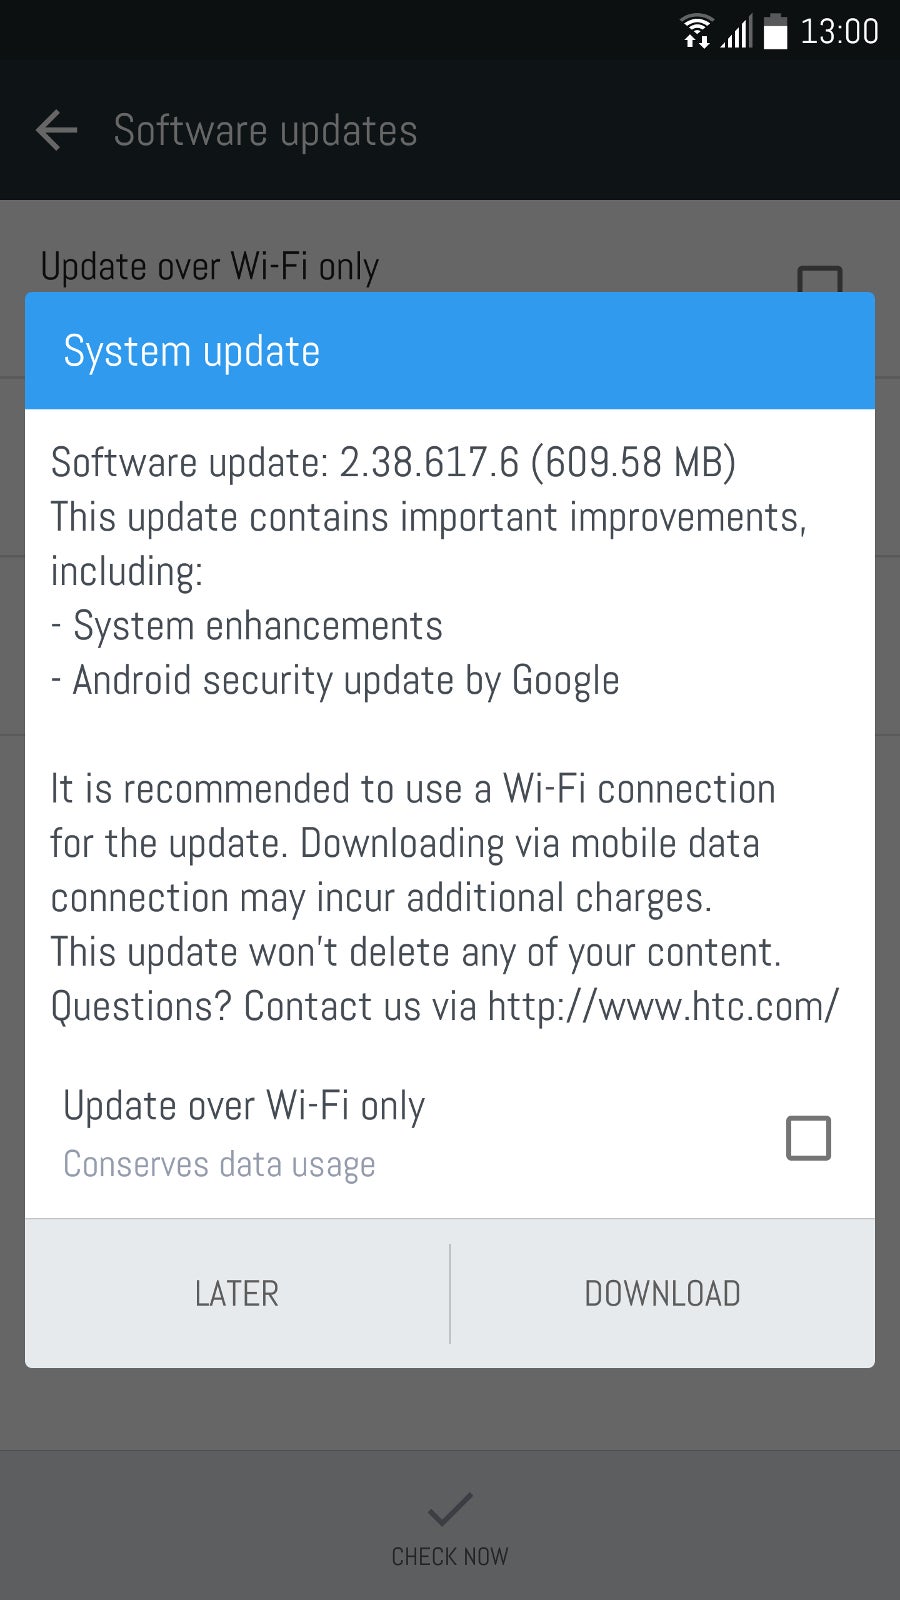 Unlocked HTC 10 gets a new software update, system and security enhancements included